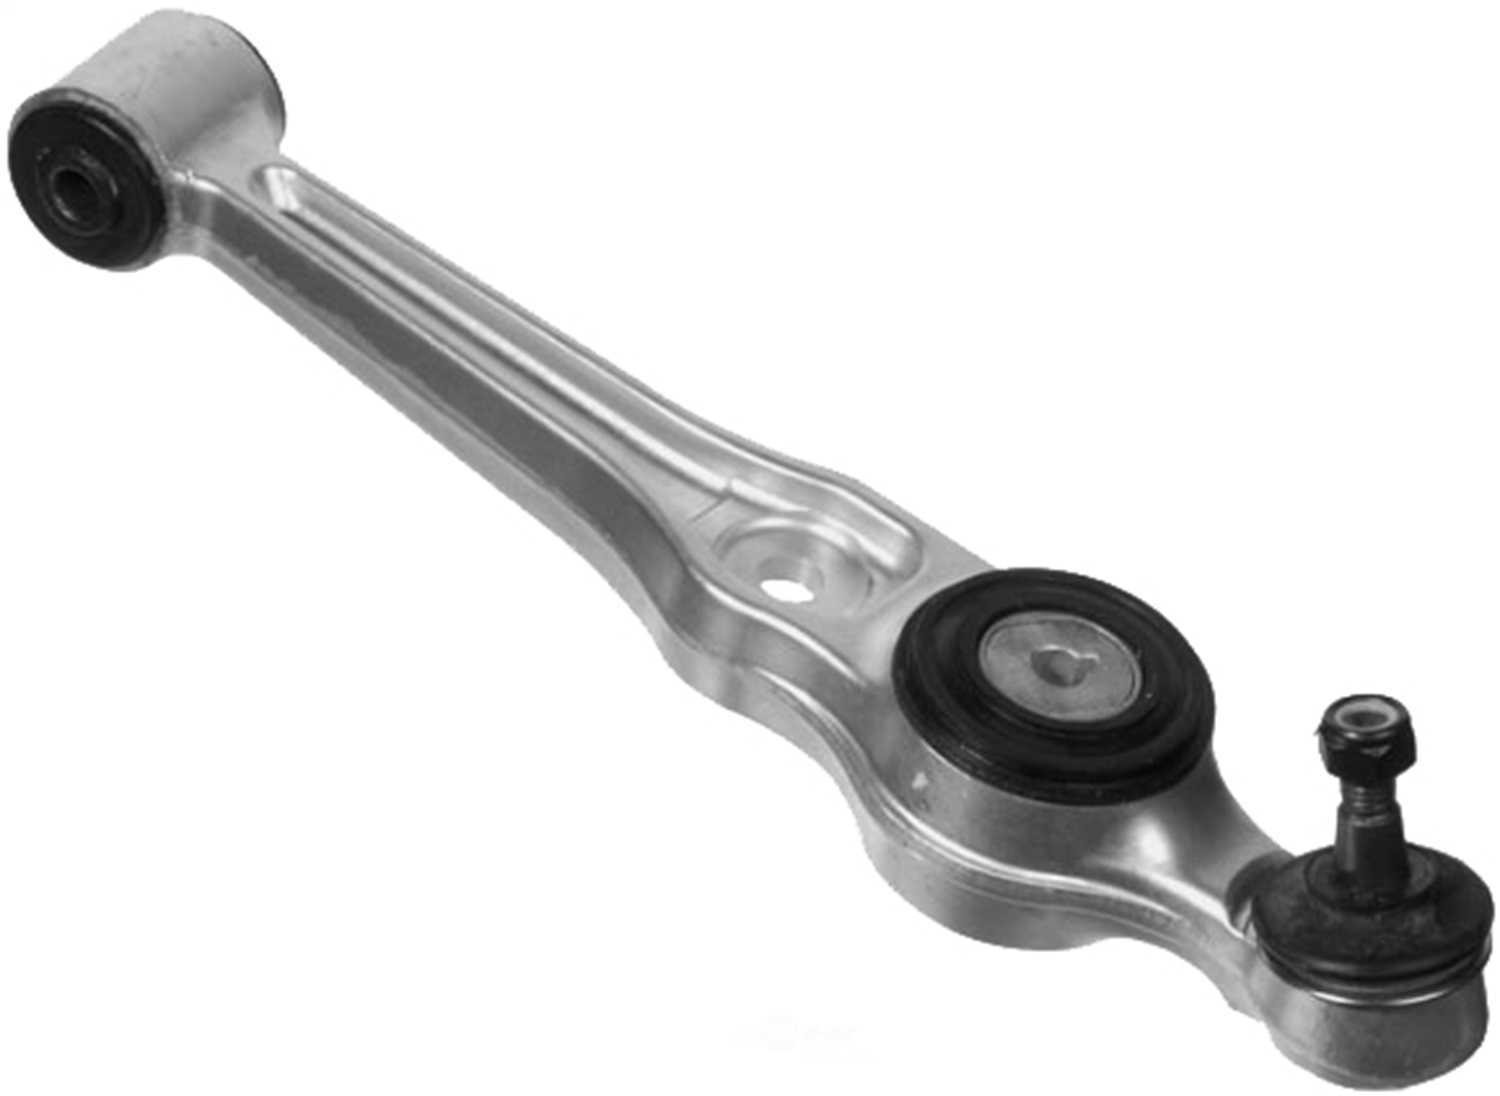 KARLYN/STI - Karlyn-STI Control Arm With Ball Joint - KLY 12-451S